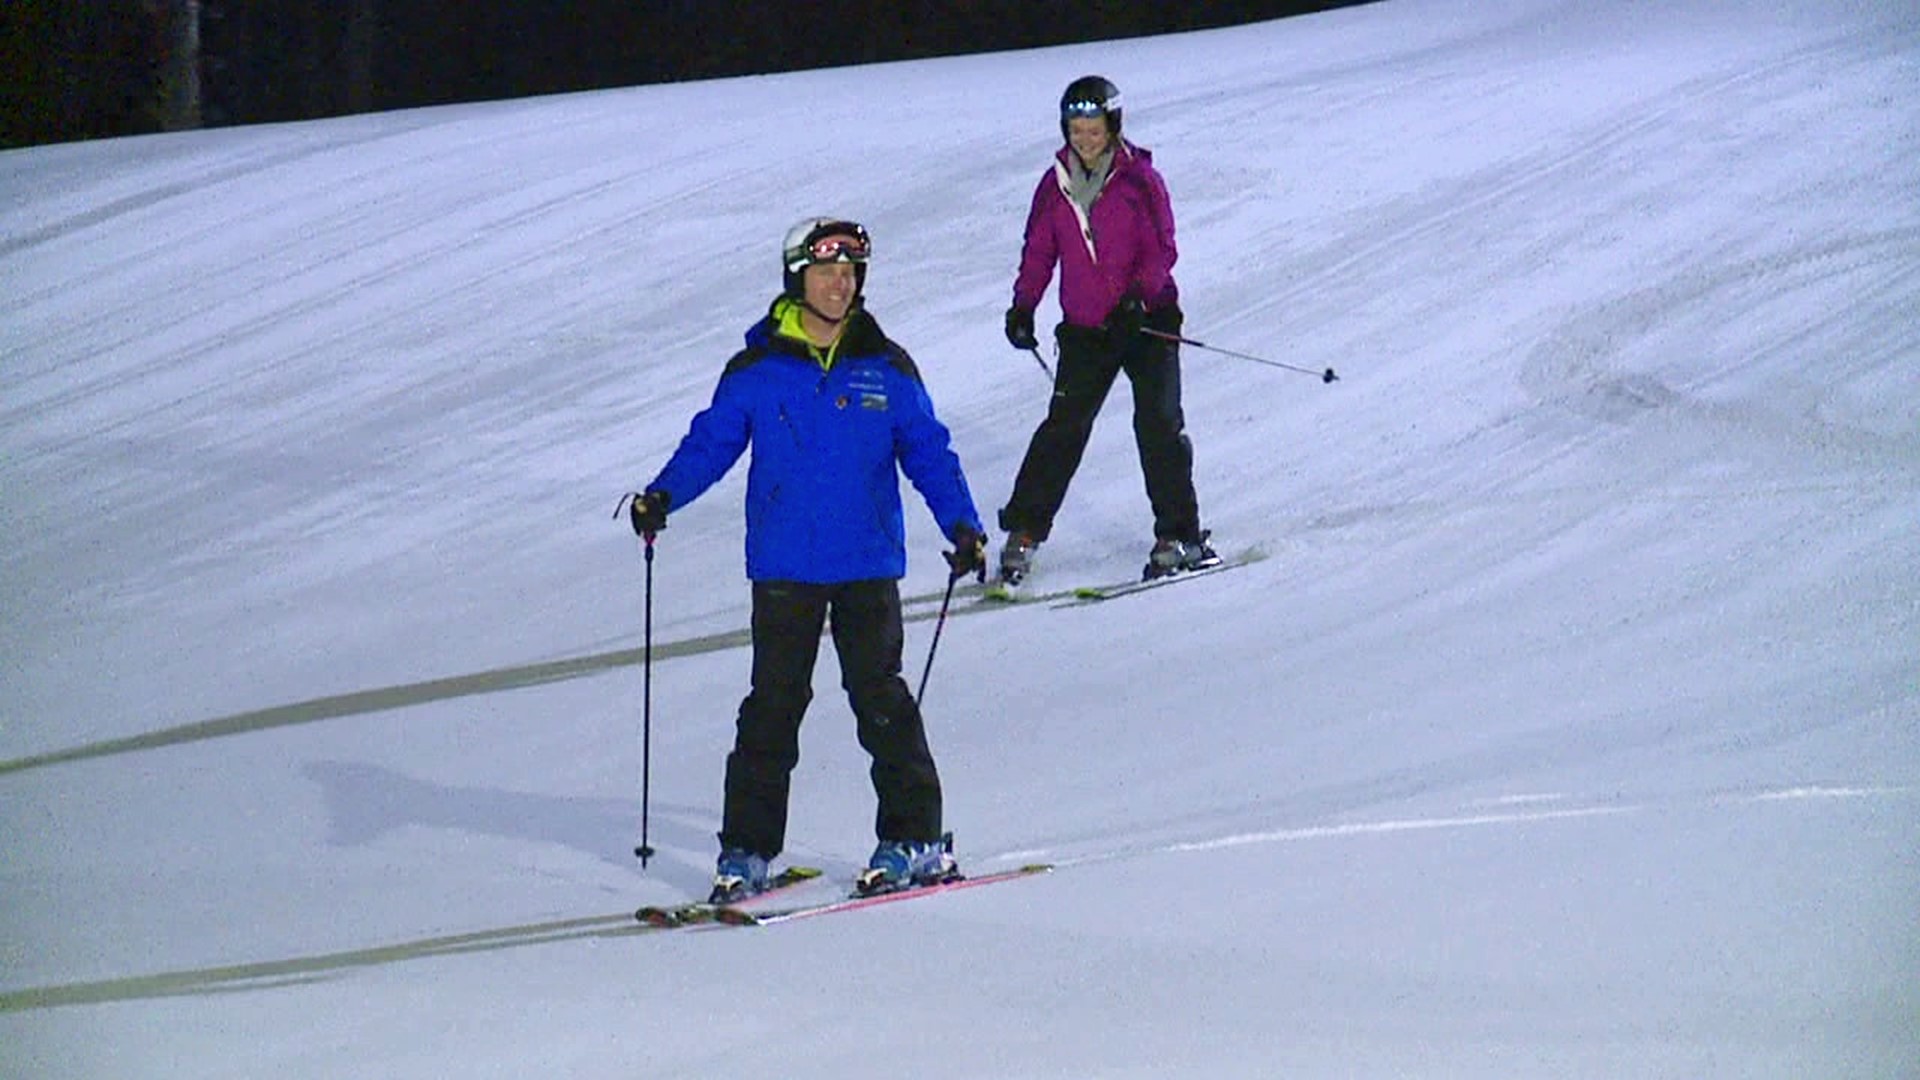 Ski resorts are ready for a busy couple of weeks. 
Last week's snow helped set the mood for the beginning of the season.